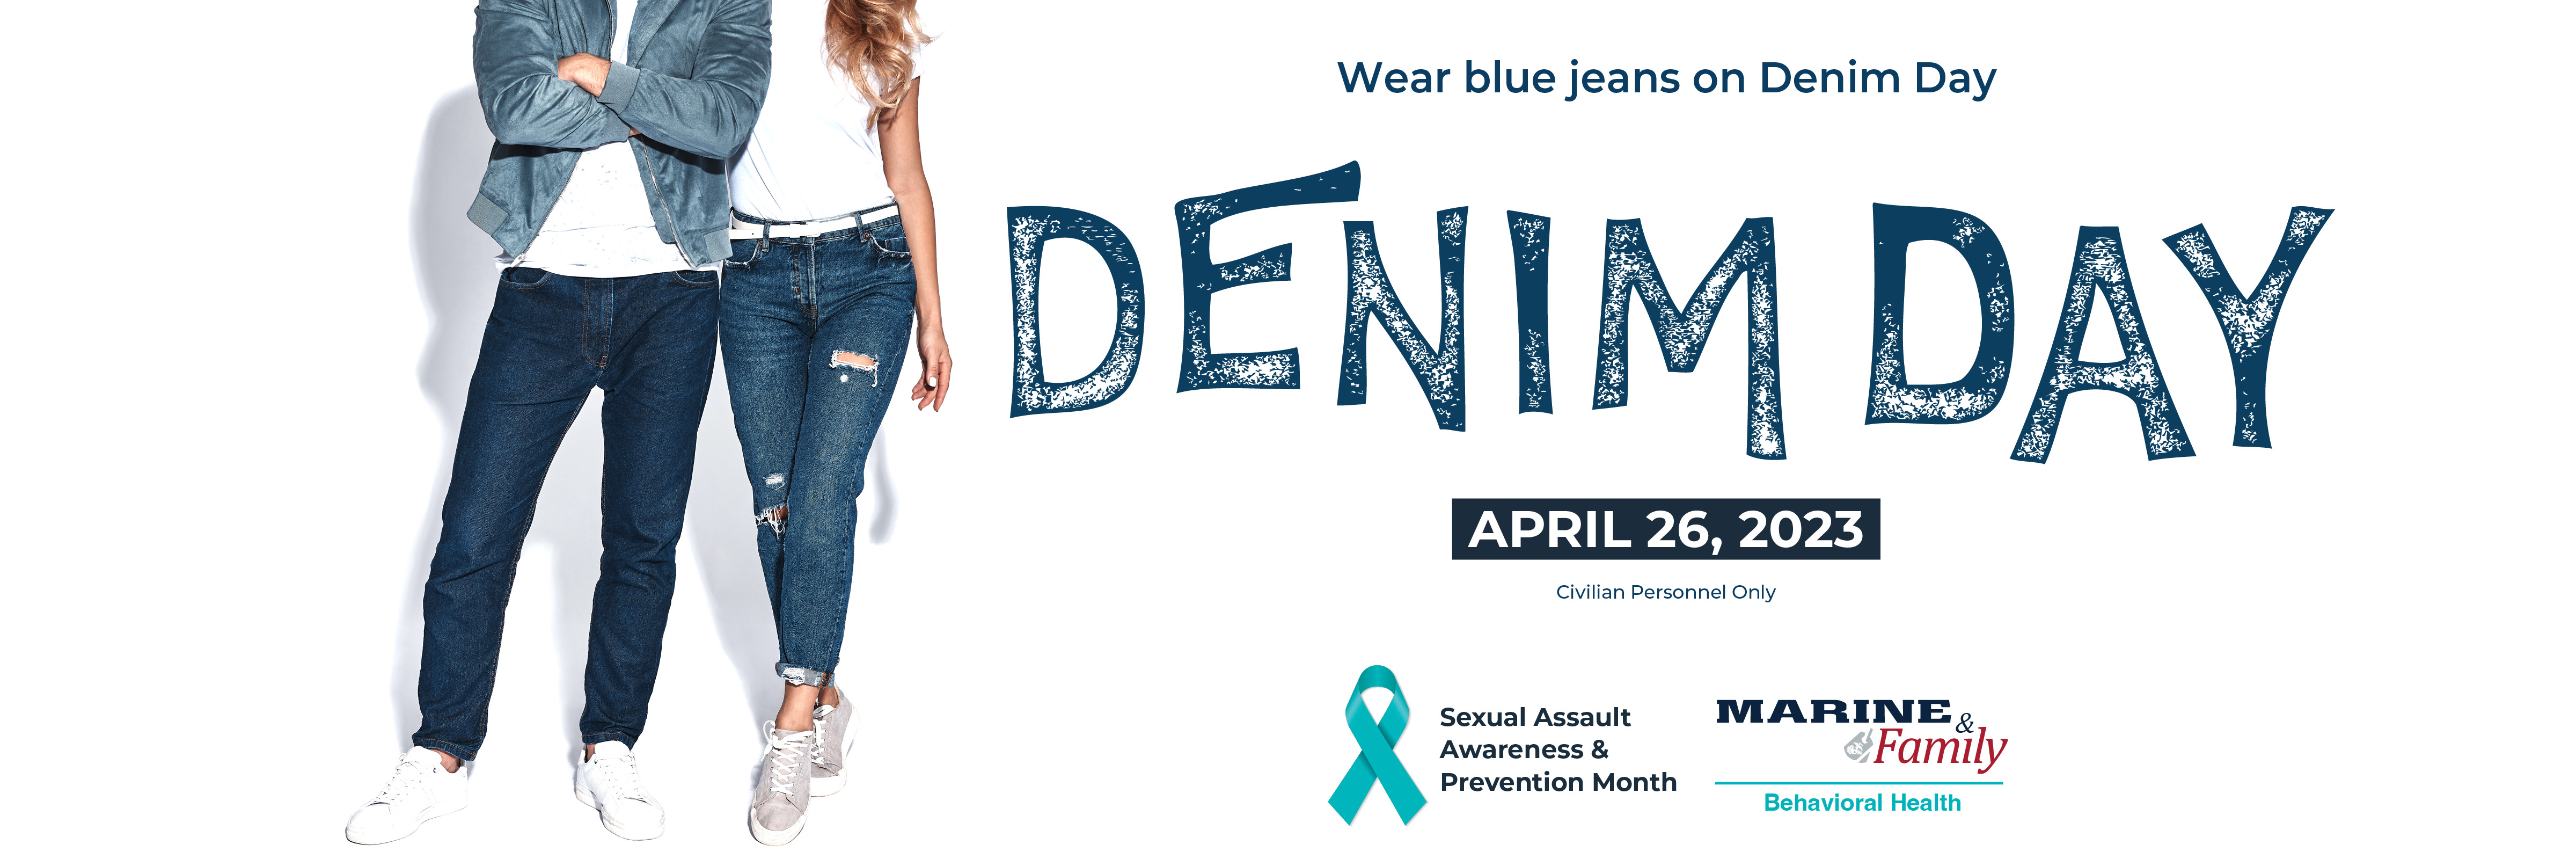 MCRD Sexual Assault Awareness and Prevention Month Denim Day 2400x800 homepage slide.jpg